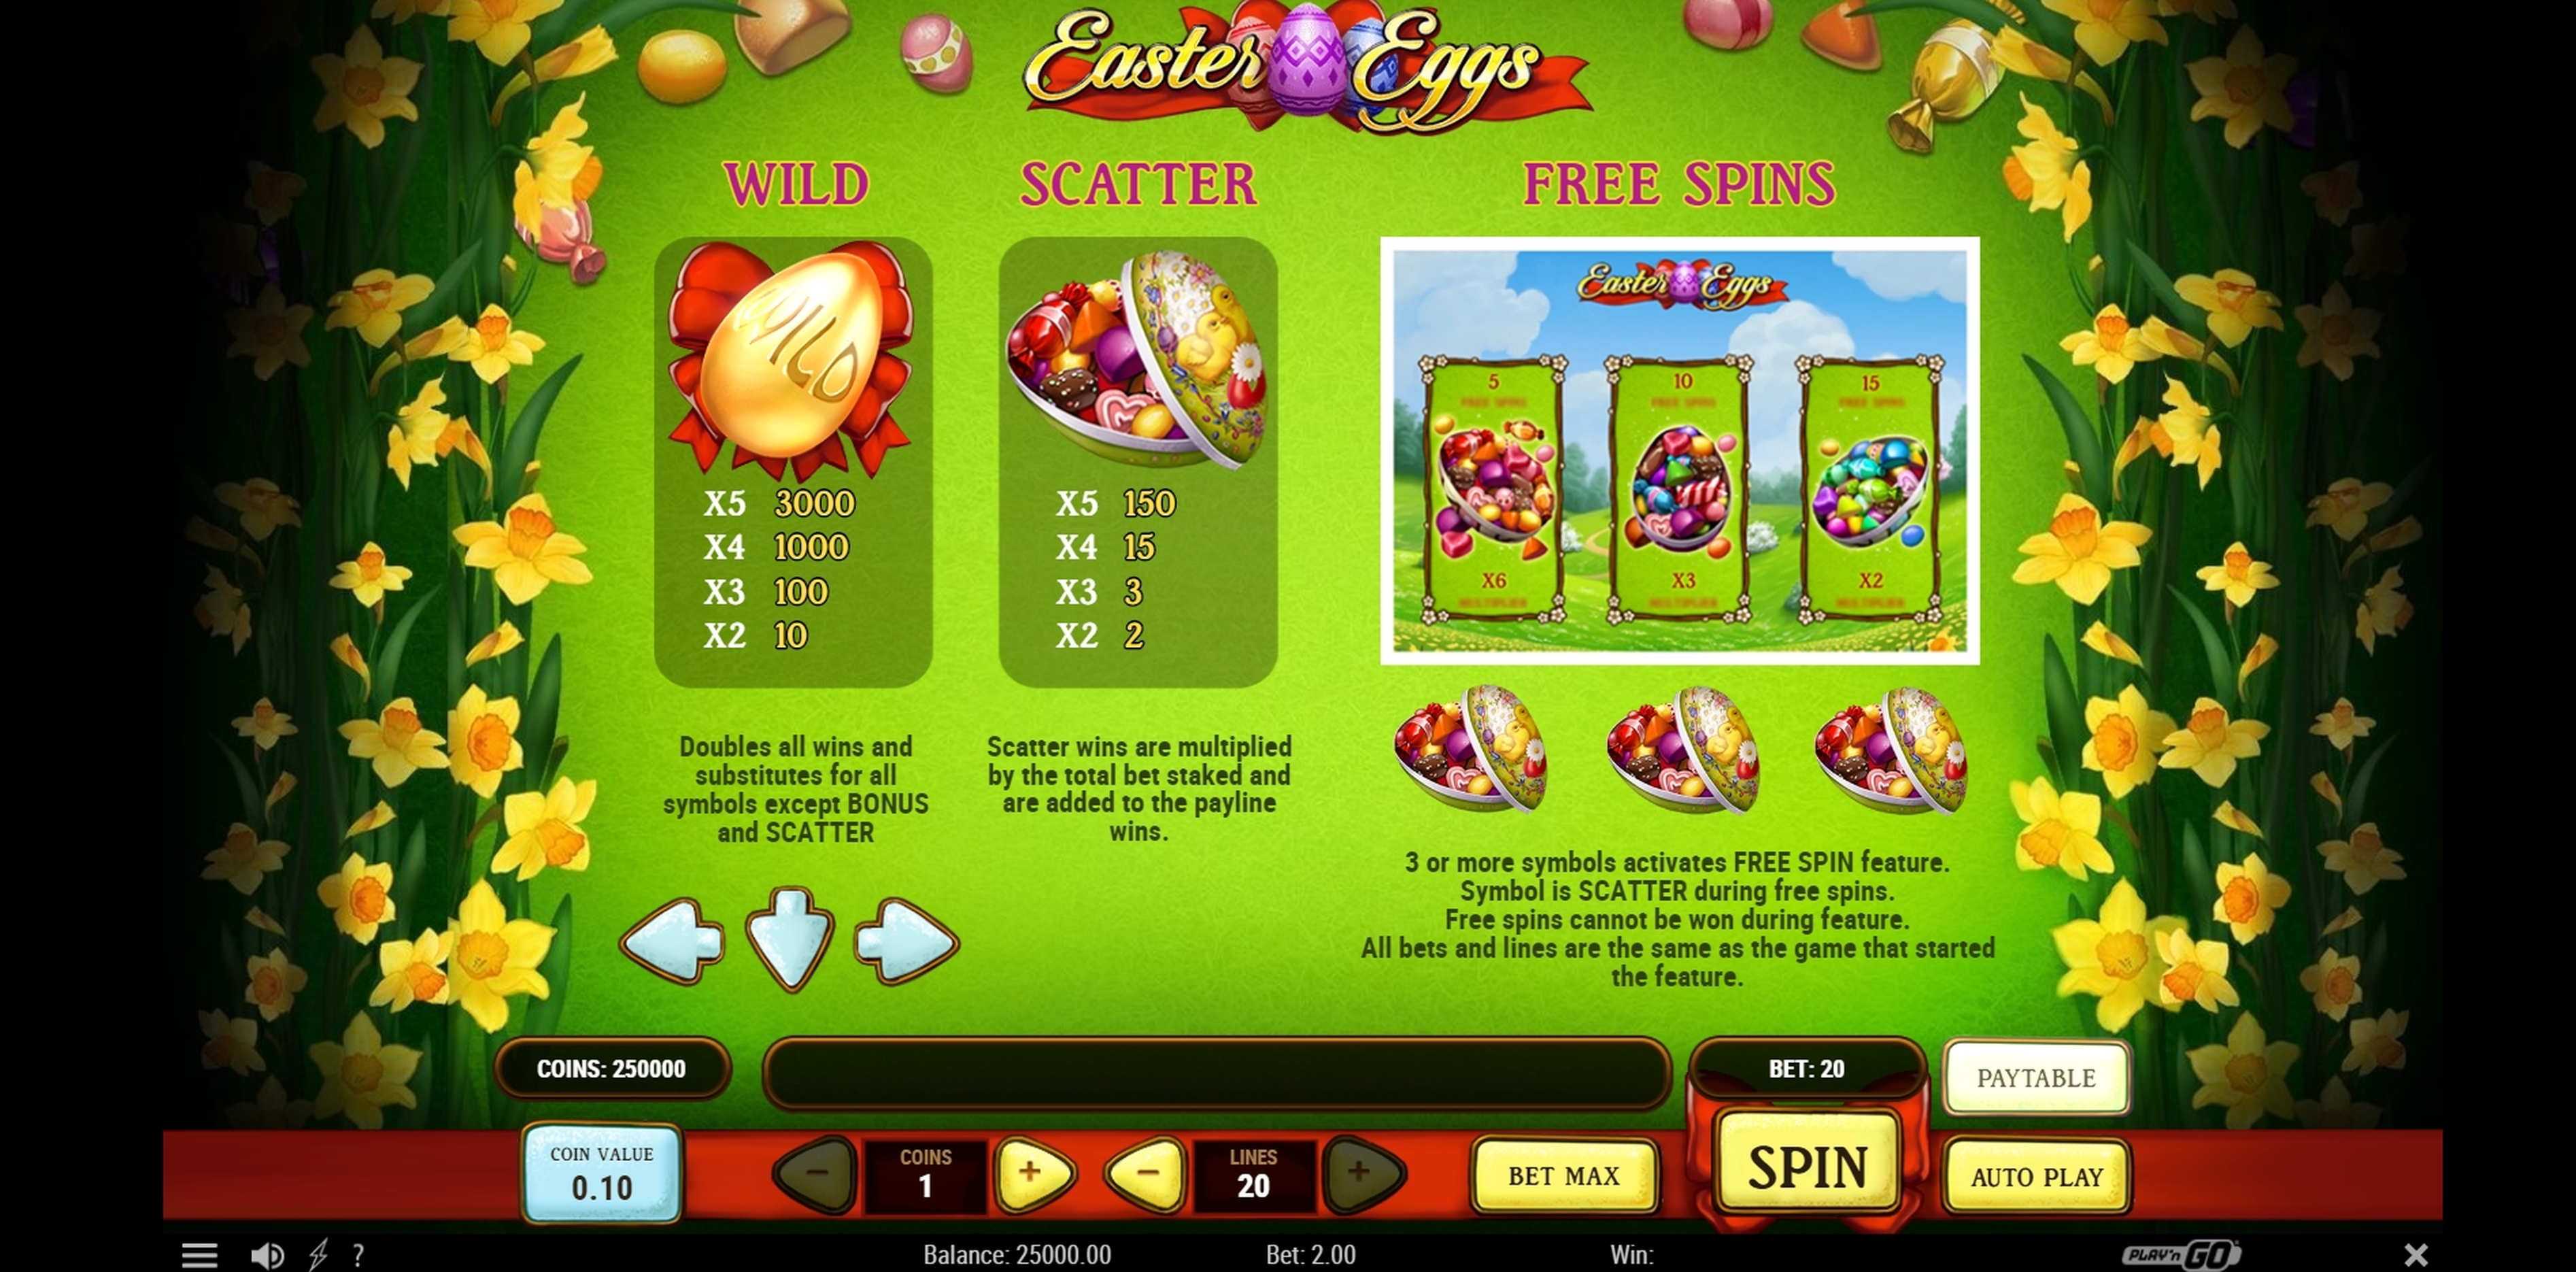 Info of Easter Eggs Slot Game by Playn GO